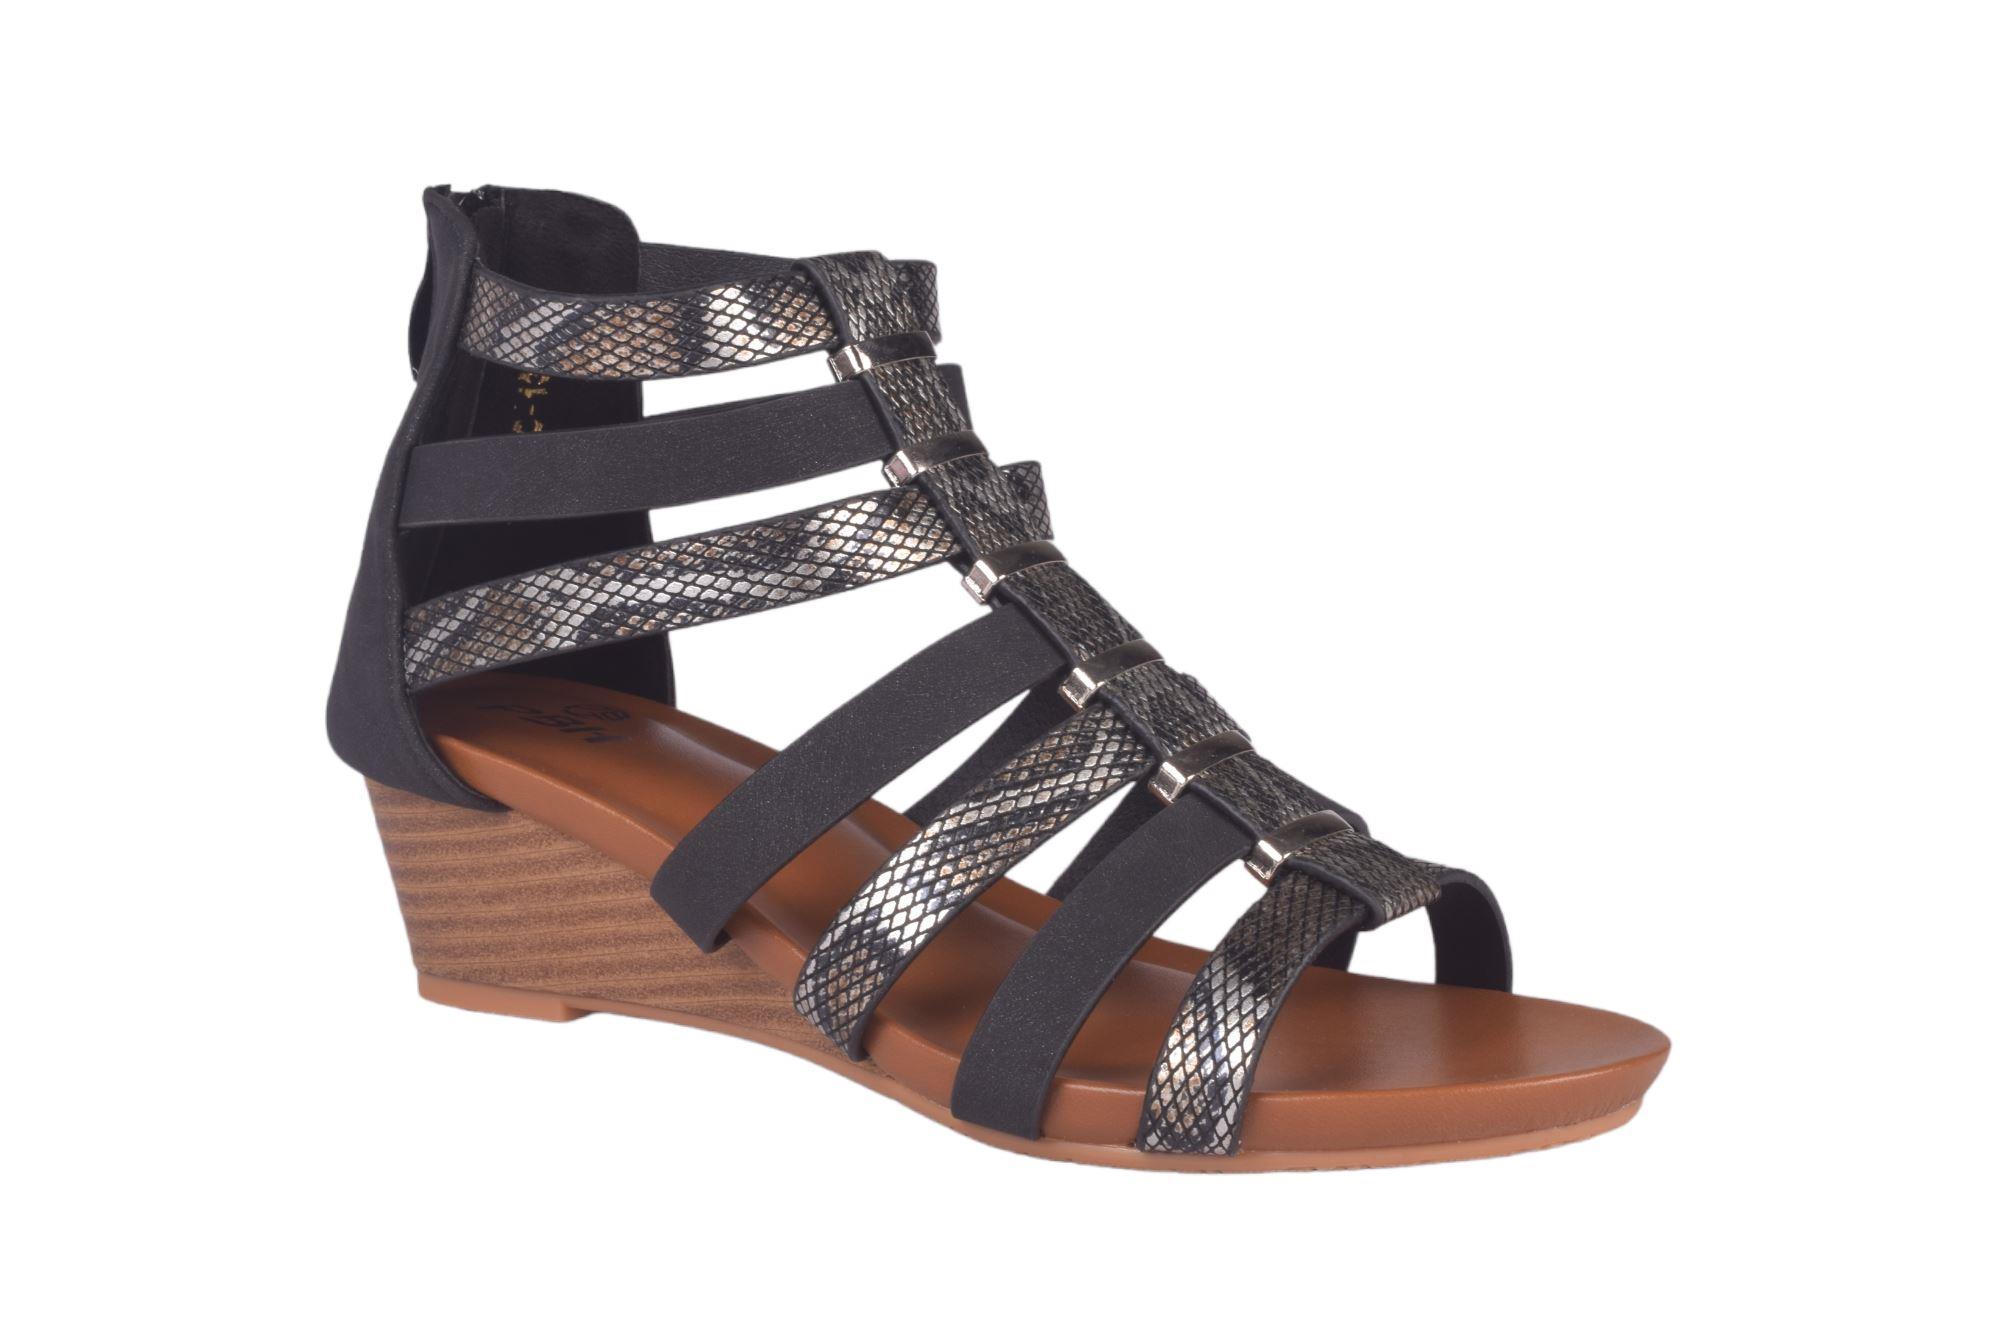 Women's Sandals: Leather, Platform, and Slide Styles | Lucky Brand